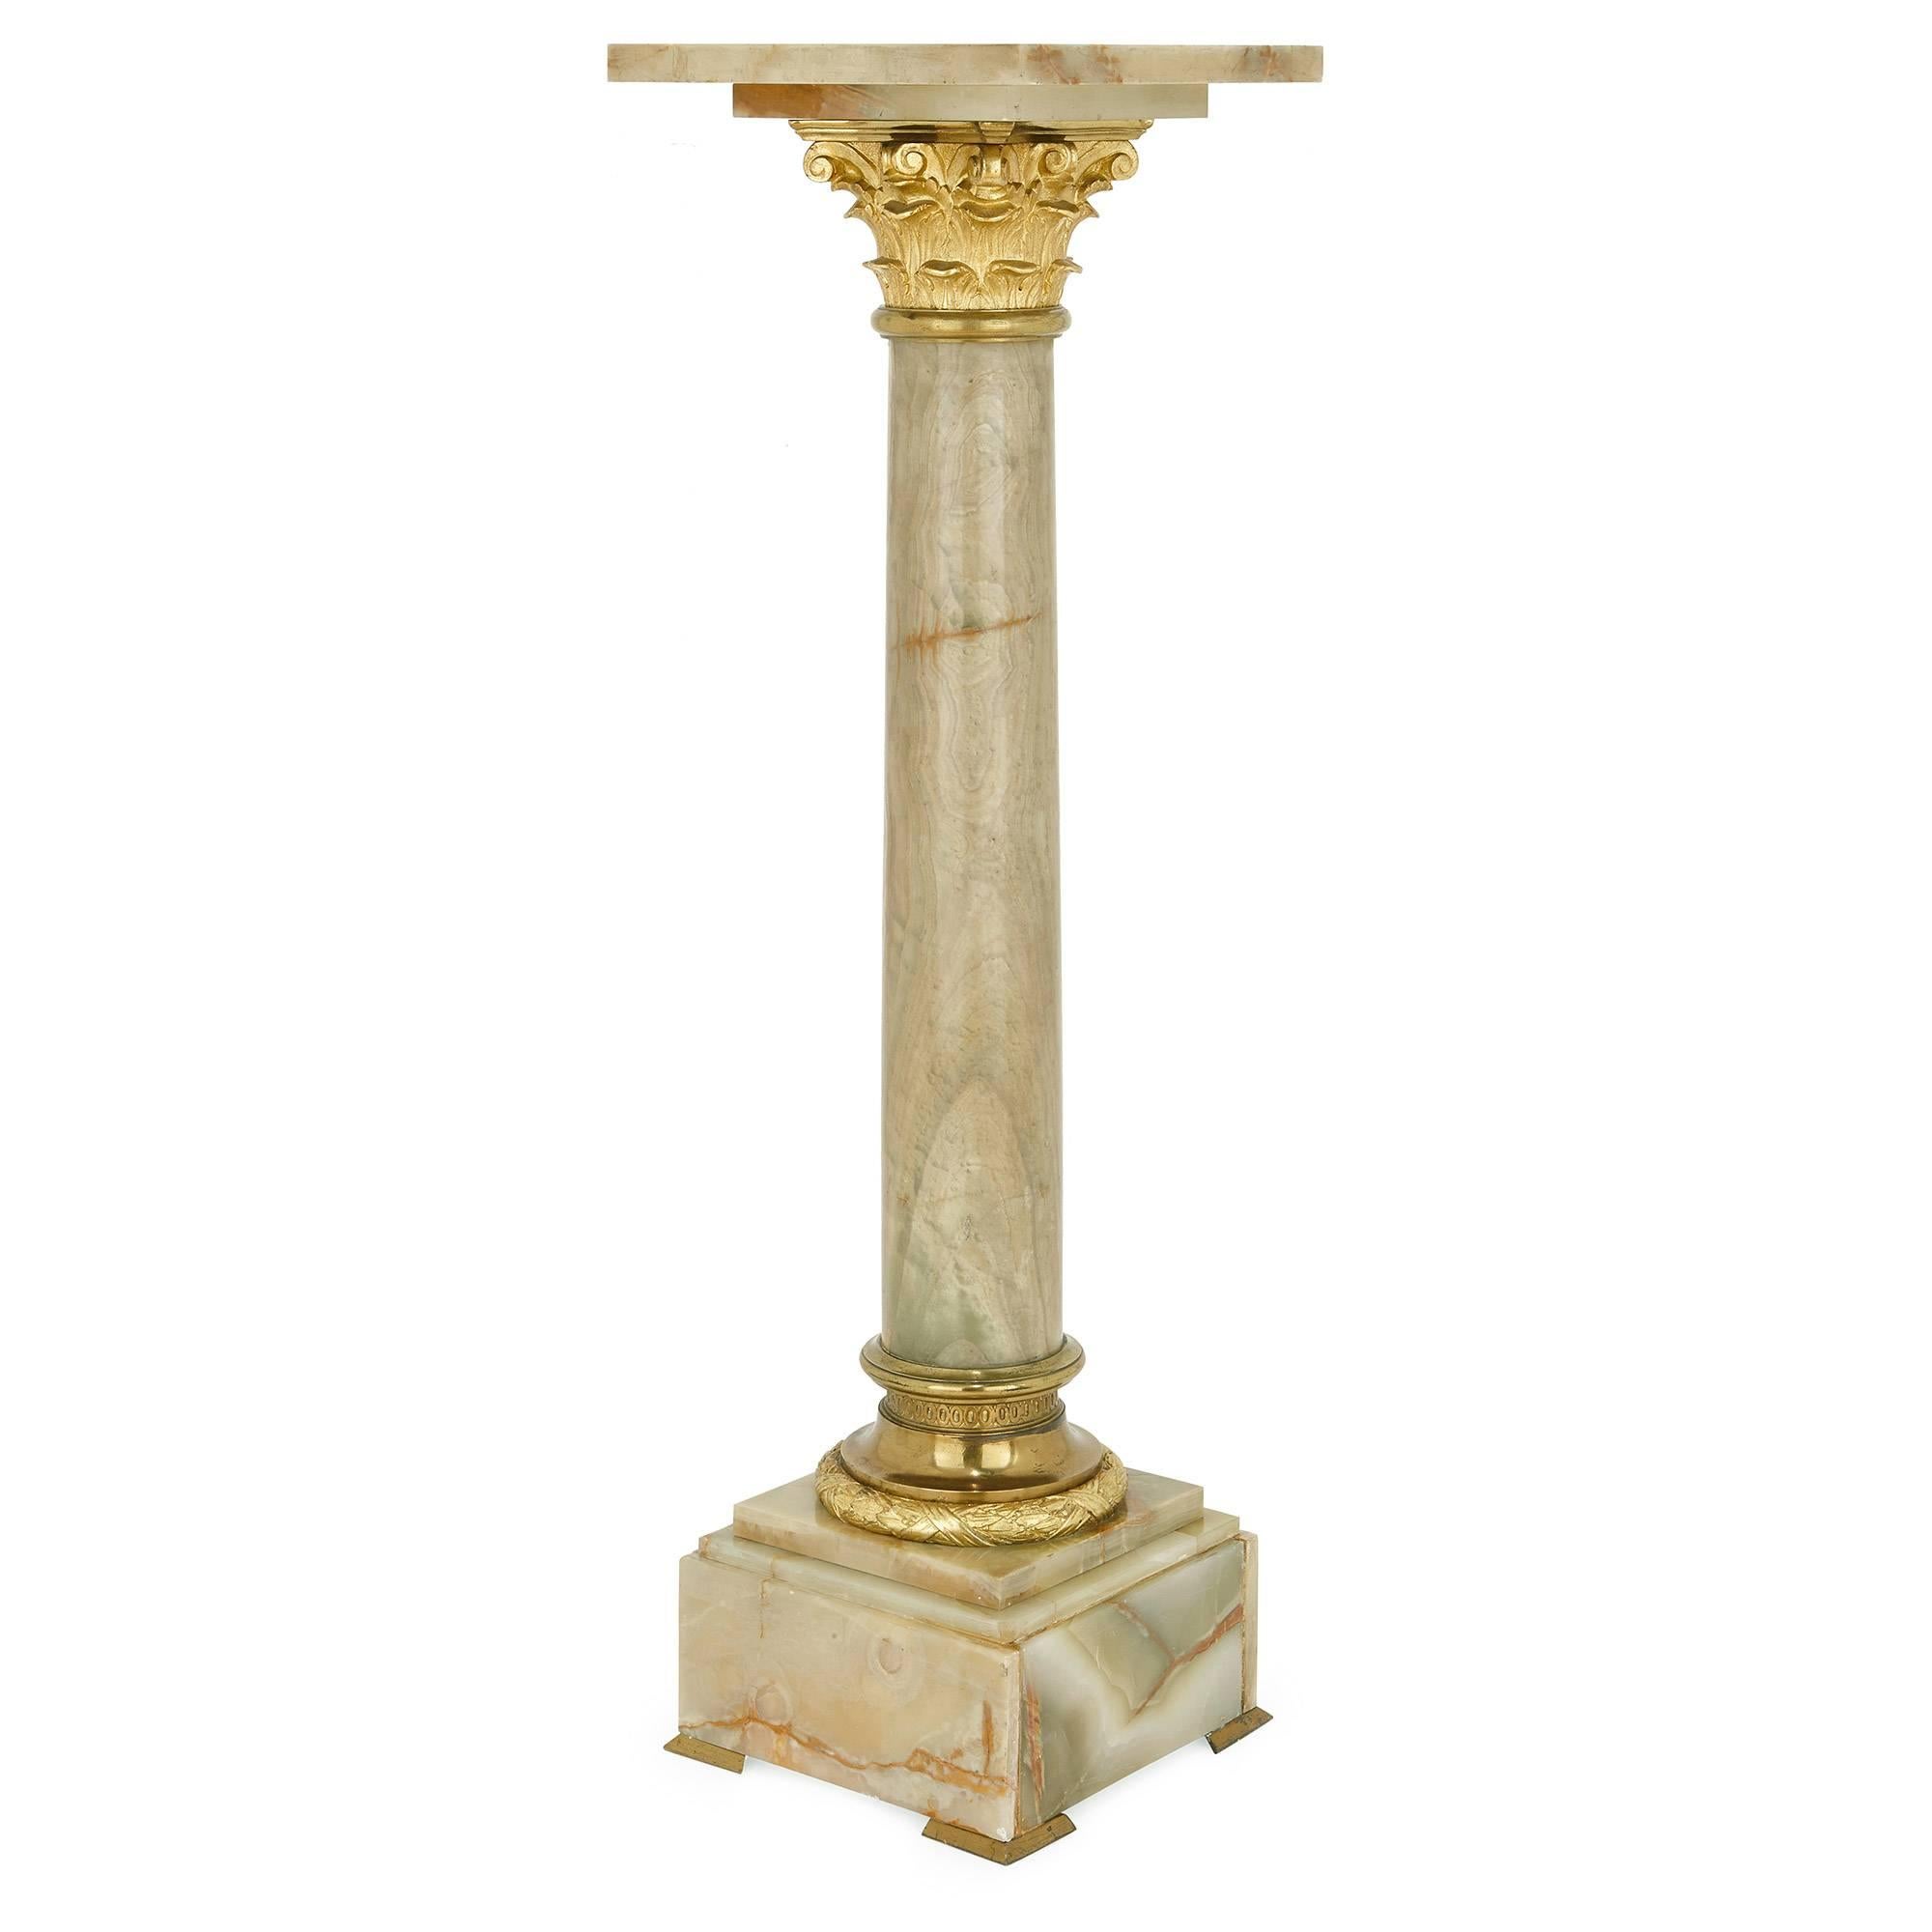 This fine, antique pedestal is surmounted by a square ormolu plinth and features an ormolu Corinthian capital atop the main cylindrical column of green onyx. The base of the column finishes with an ormolu socle, and stands upon a square base of